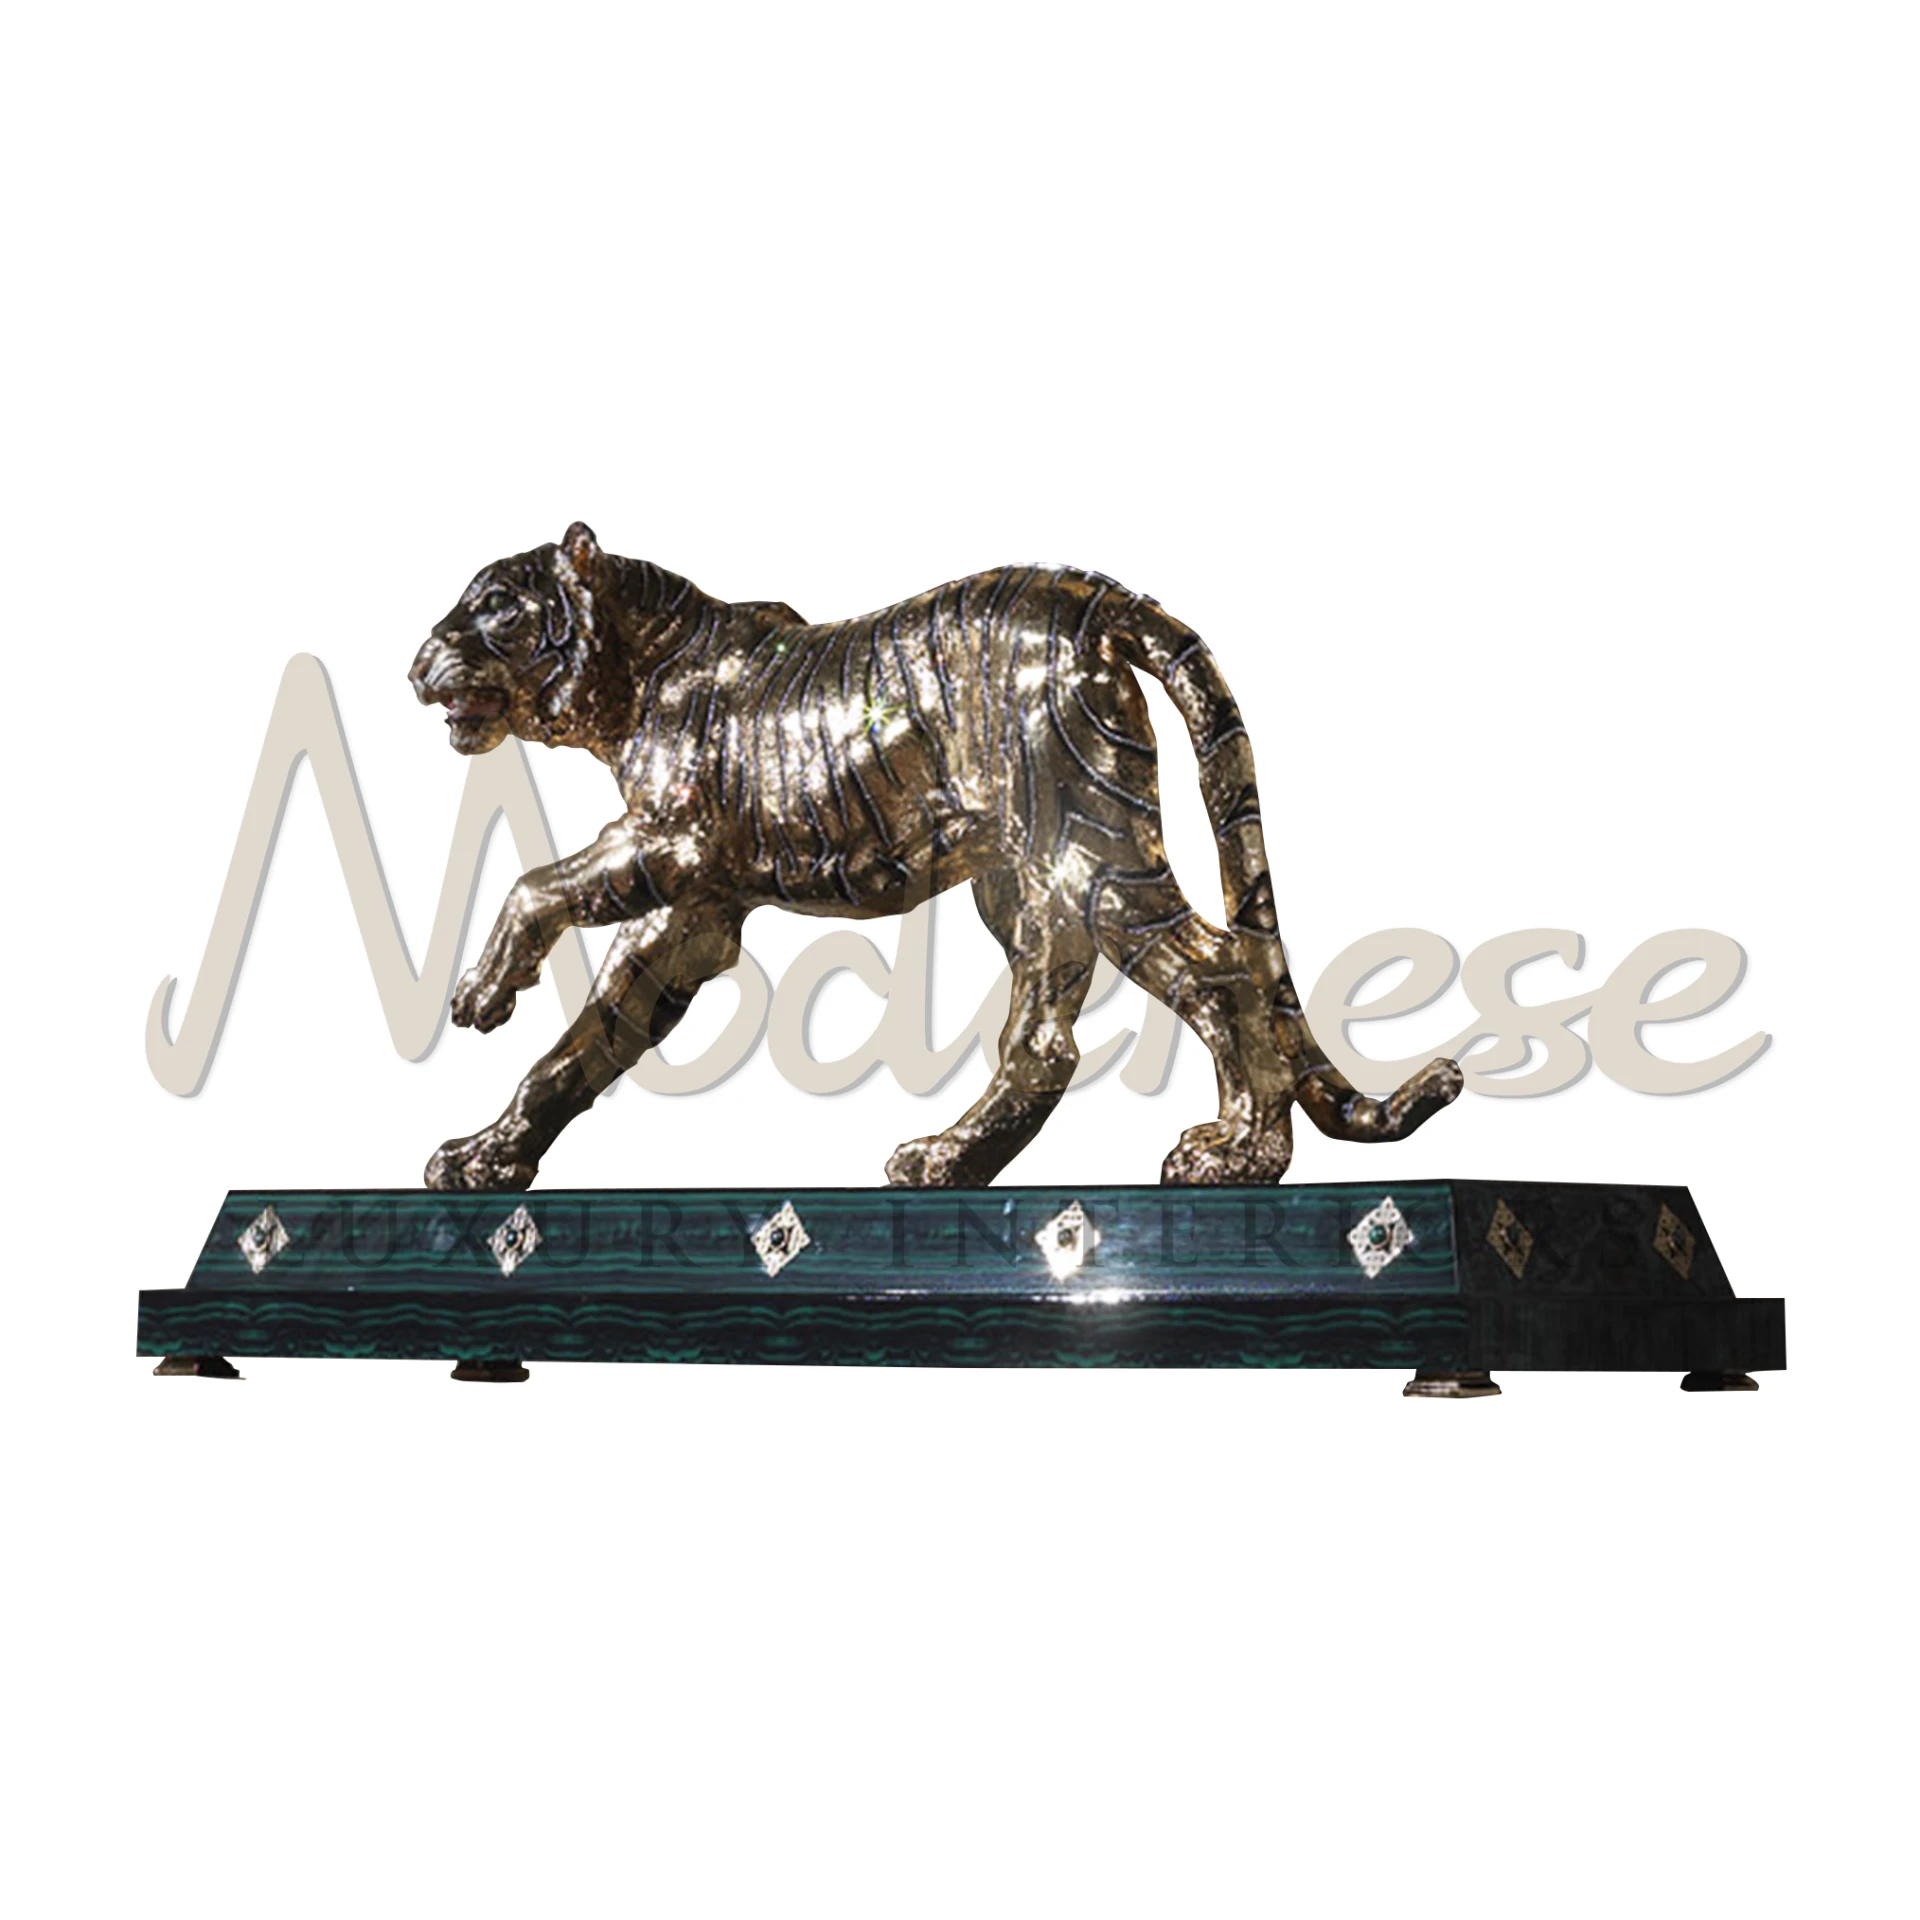 Royal Tiger statue, capturing the majestic strength and beauty of the tiger, crafted in high-quality materials for a striking addition to luxury home décor.